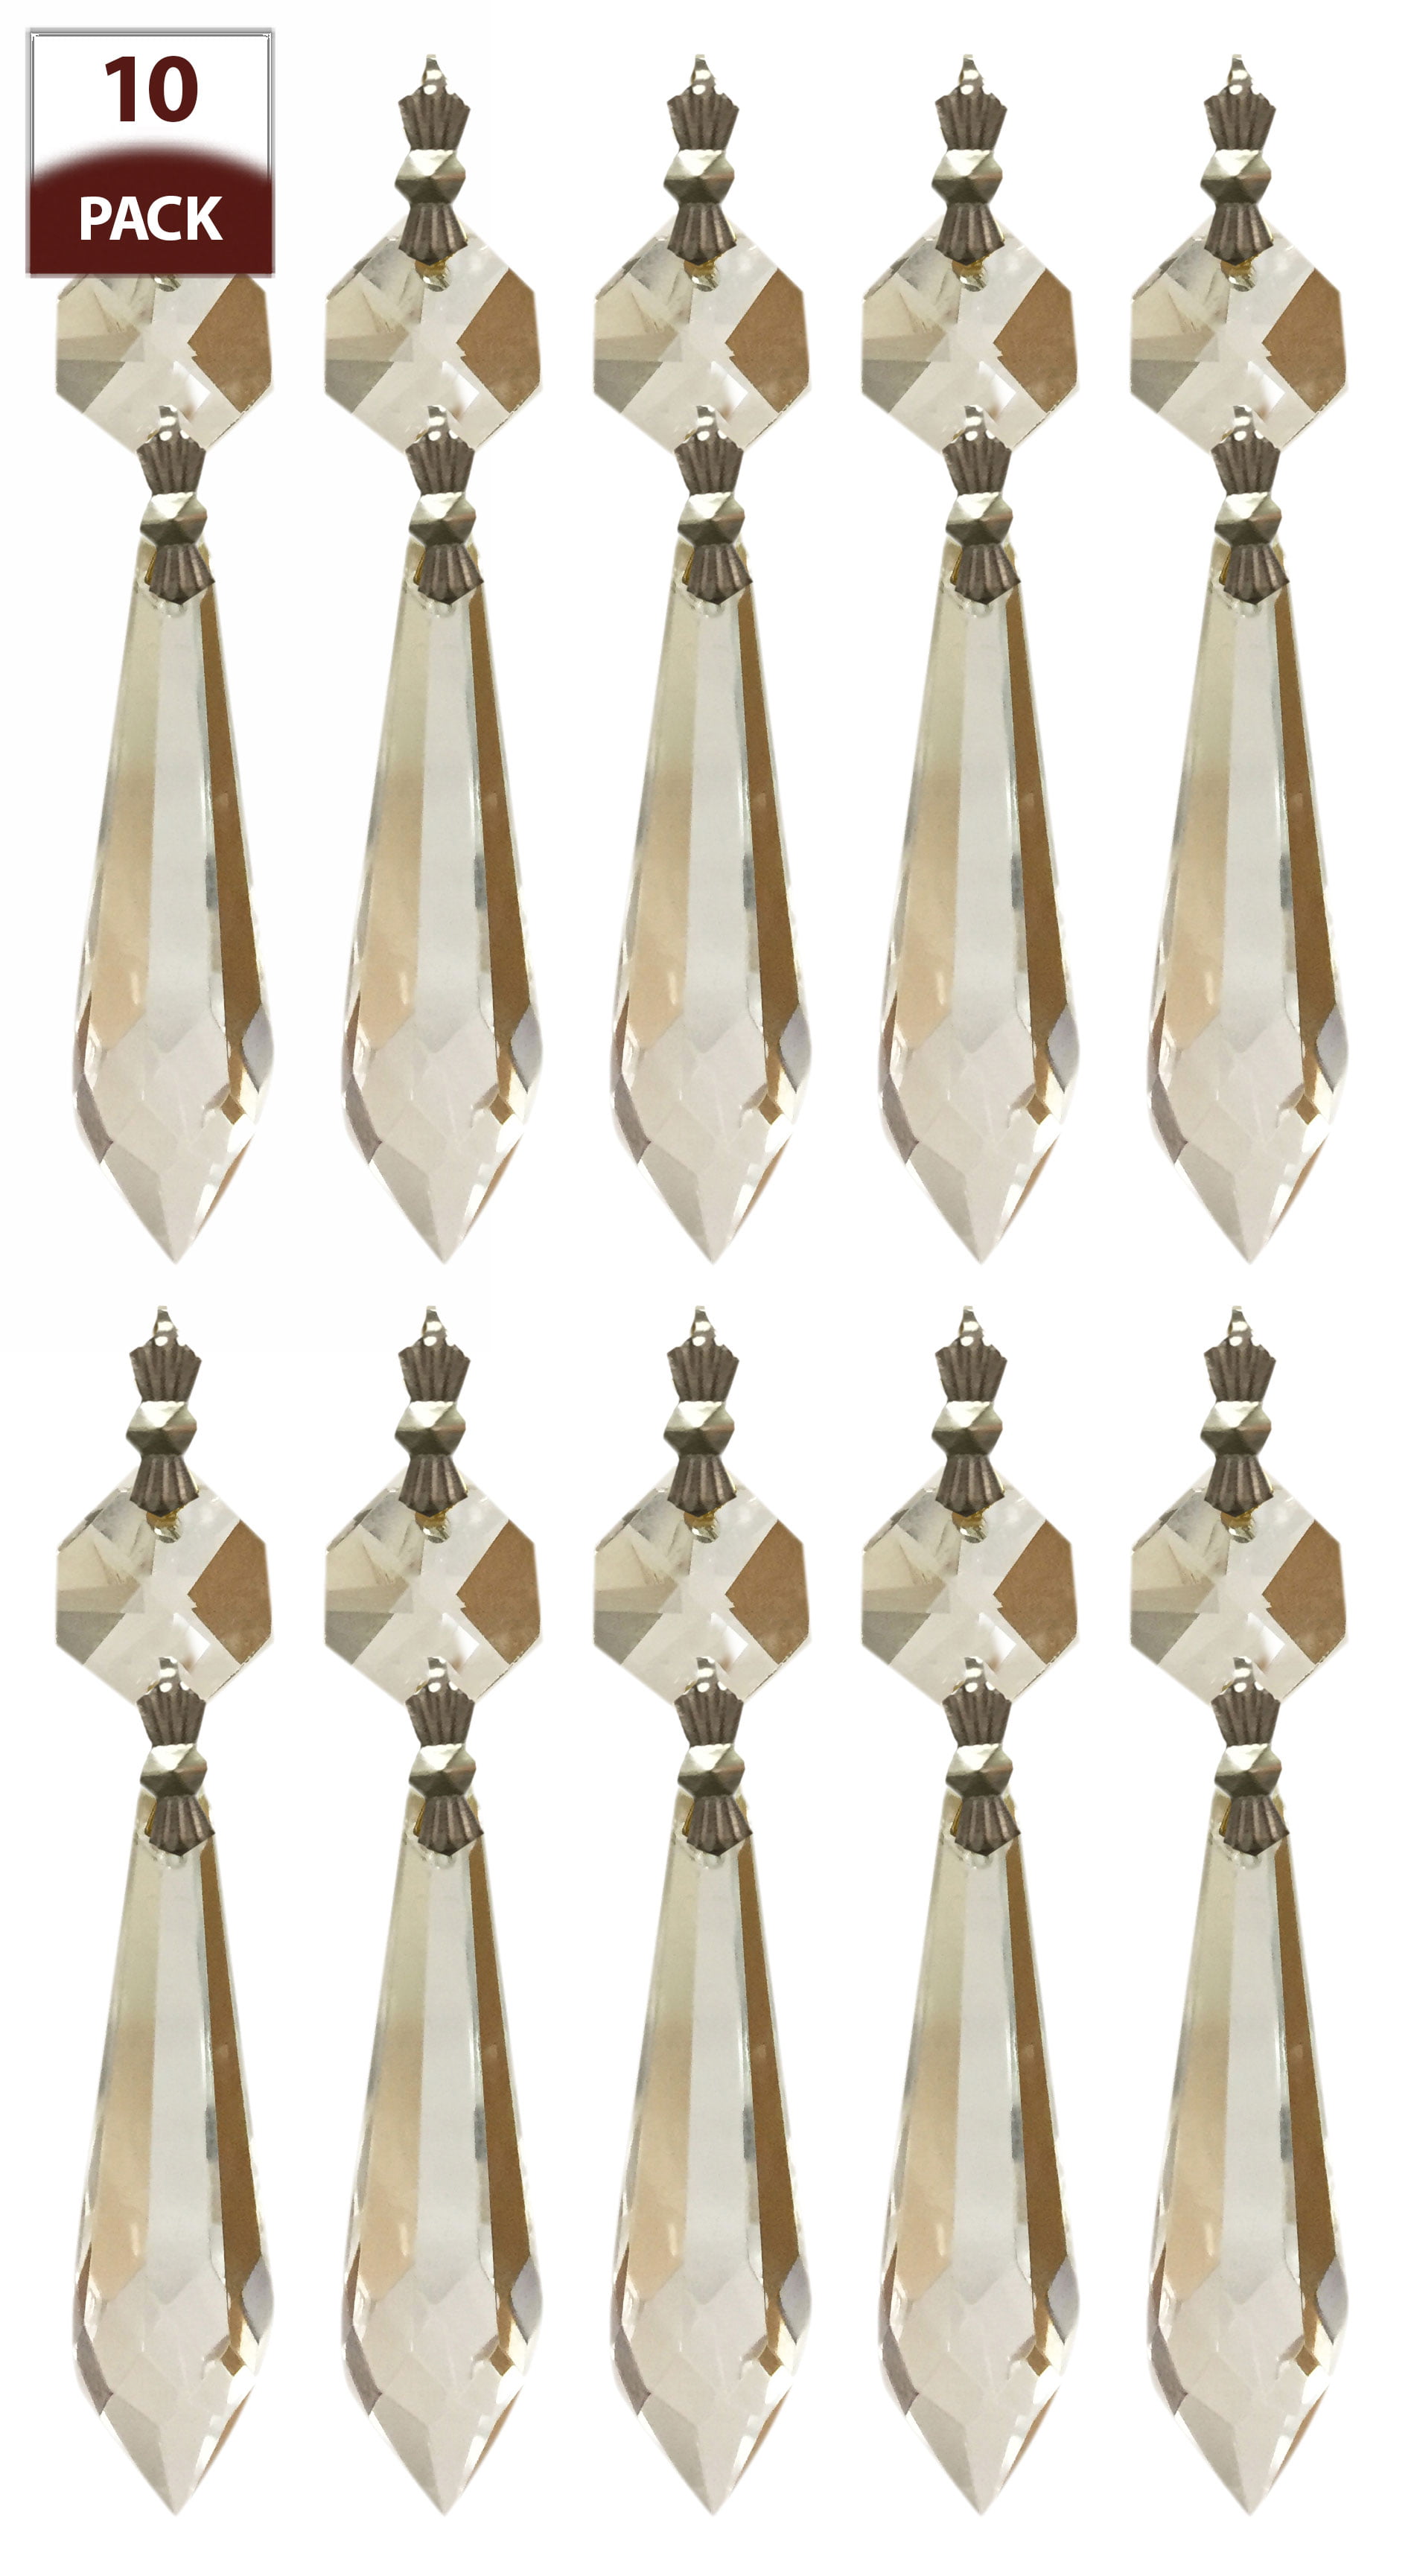 10 PK Chandelier Replacement Crystal Prisms Clear U-Drop 